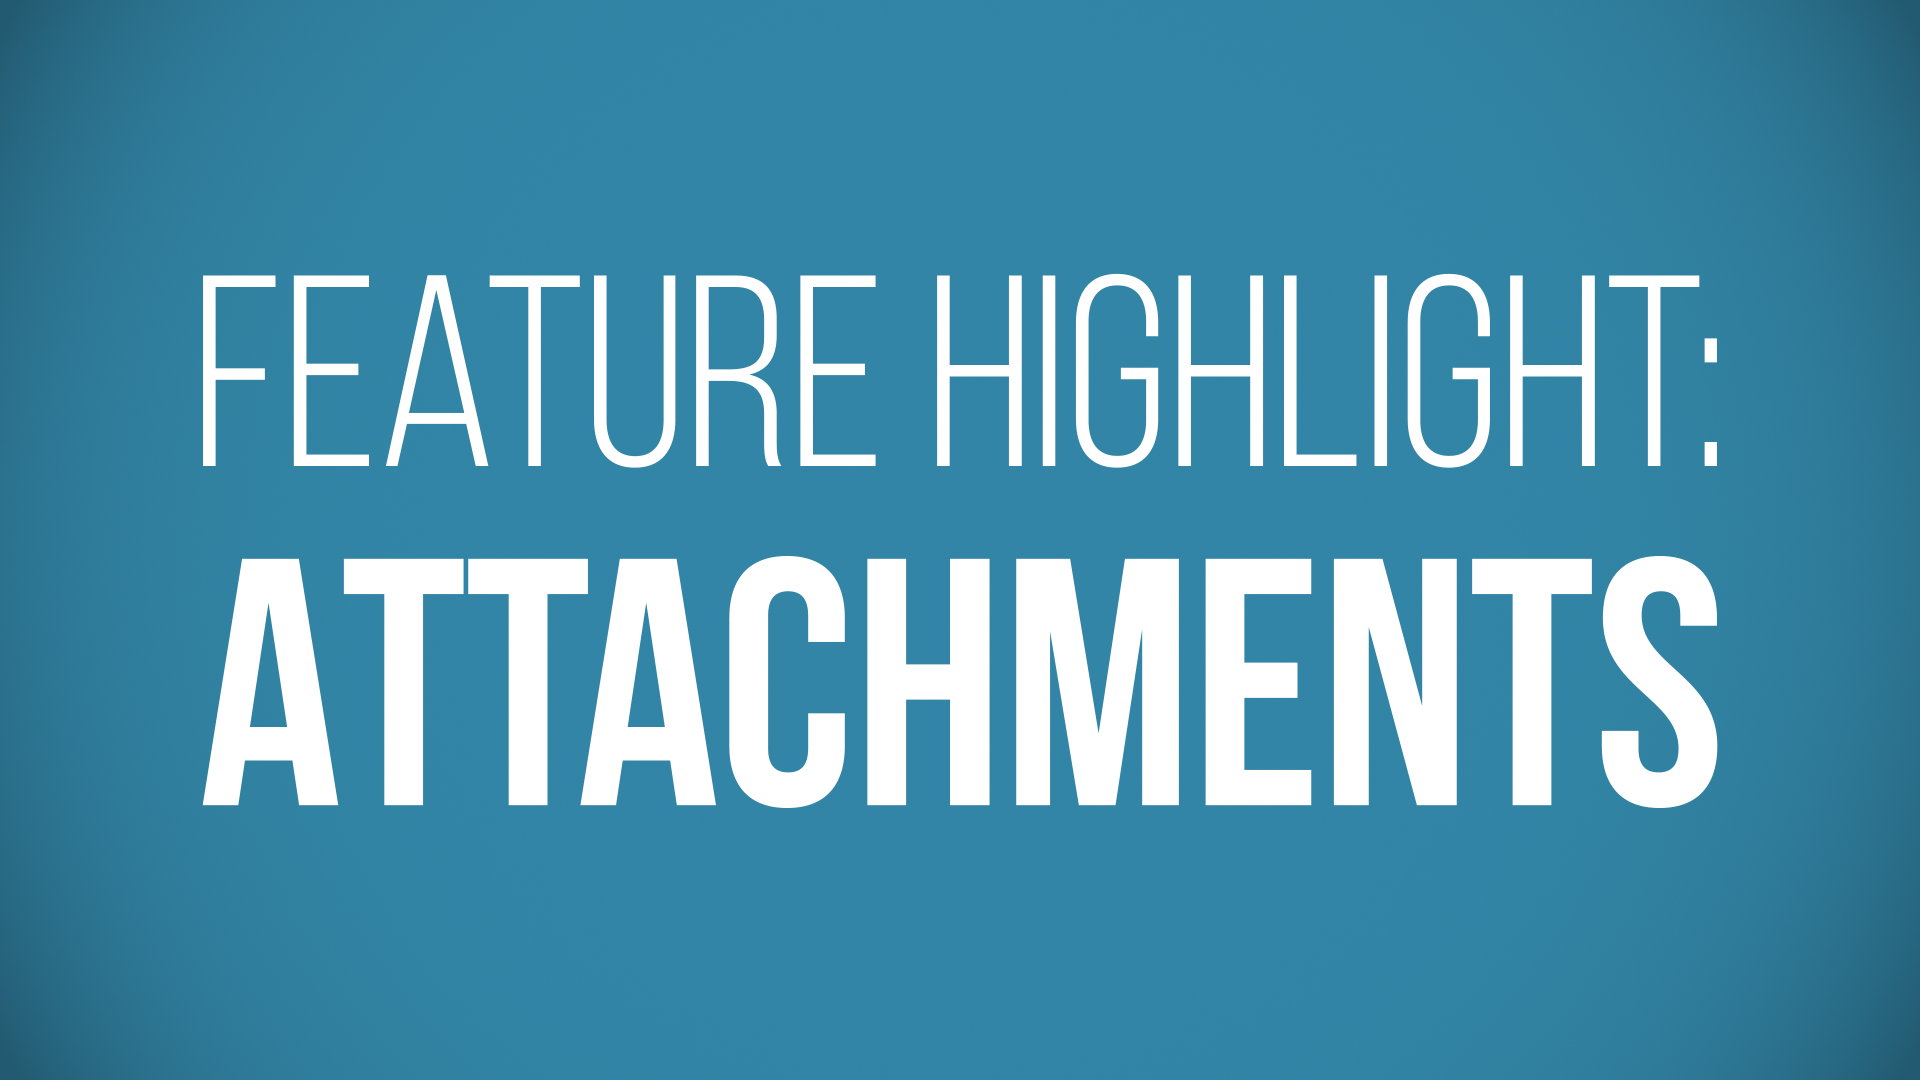 Feature Highlight: Attachments